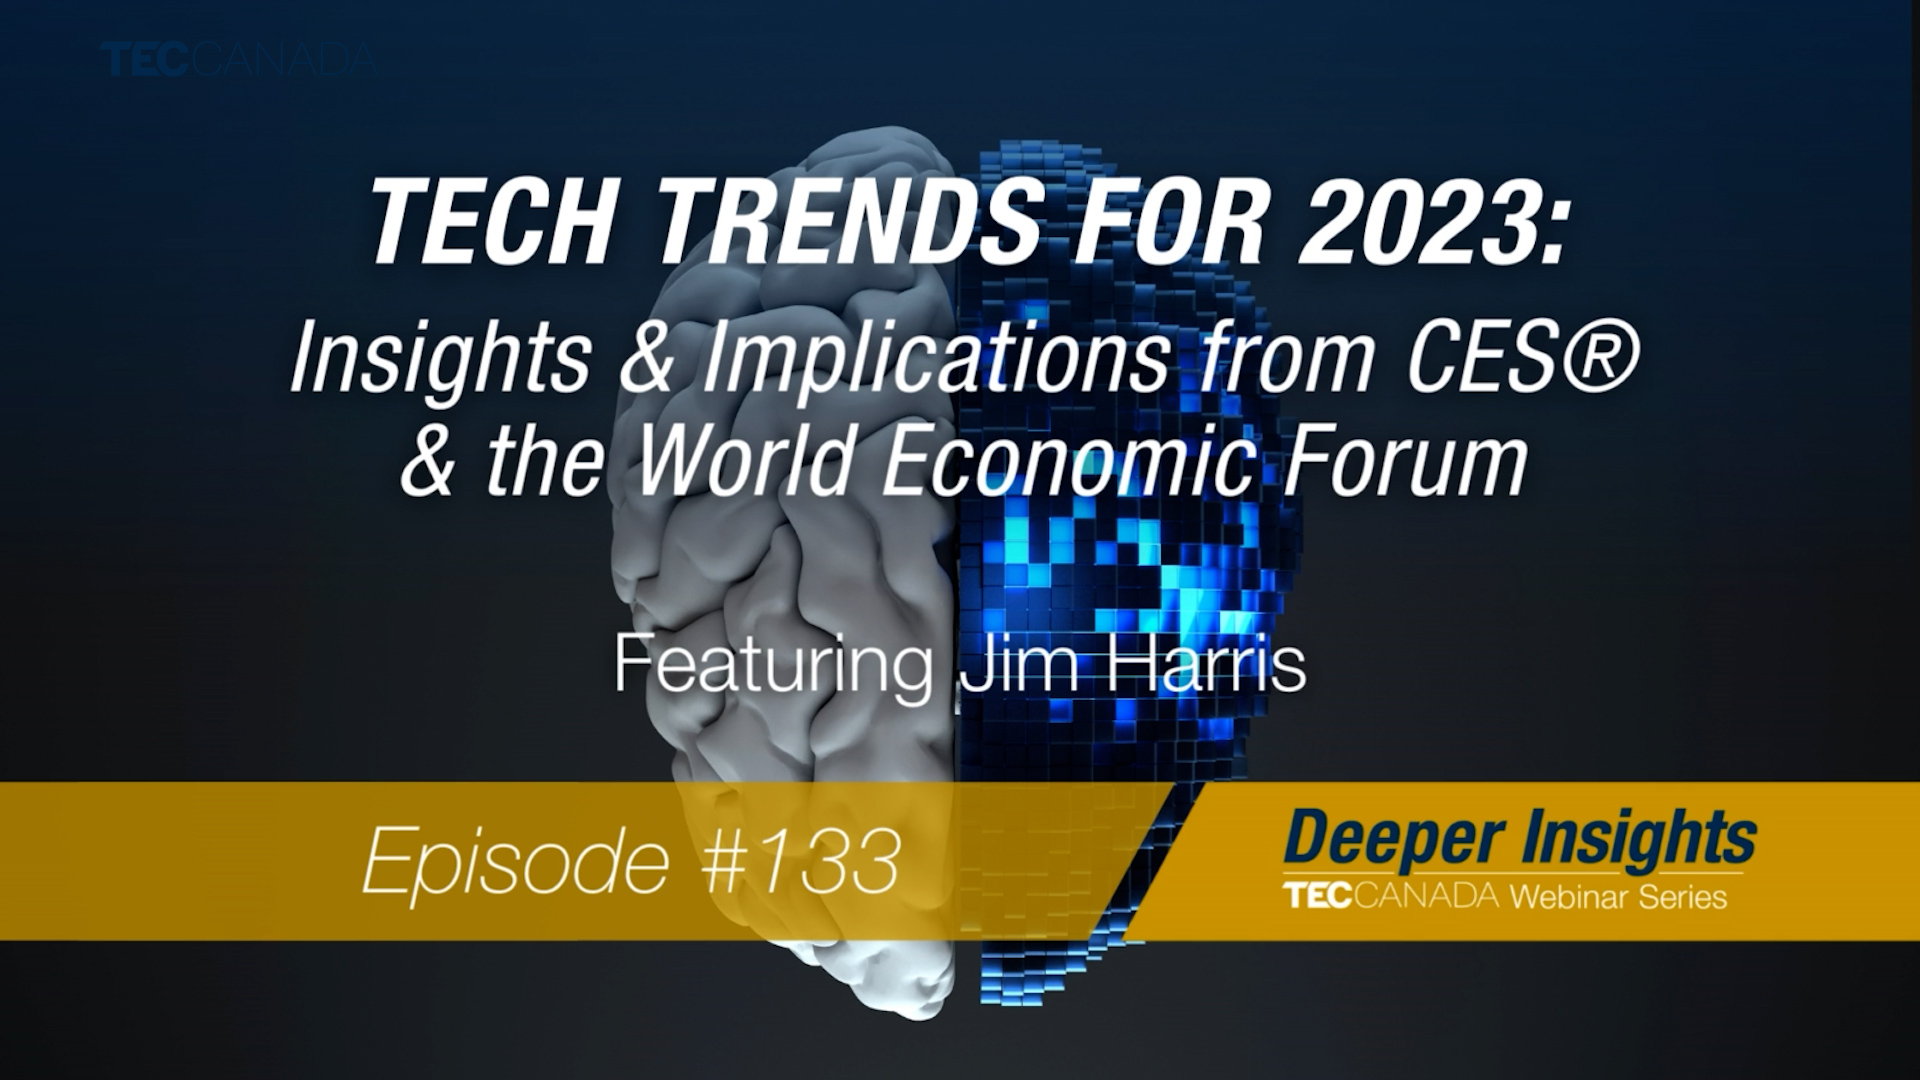 Tech Trends for 2023: Insights & Implications from CES® & WEF with Jim Harris